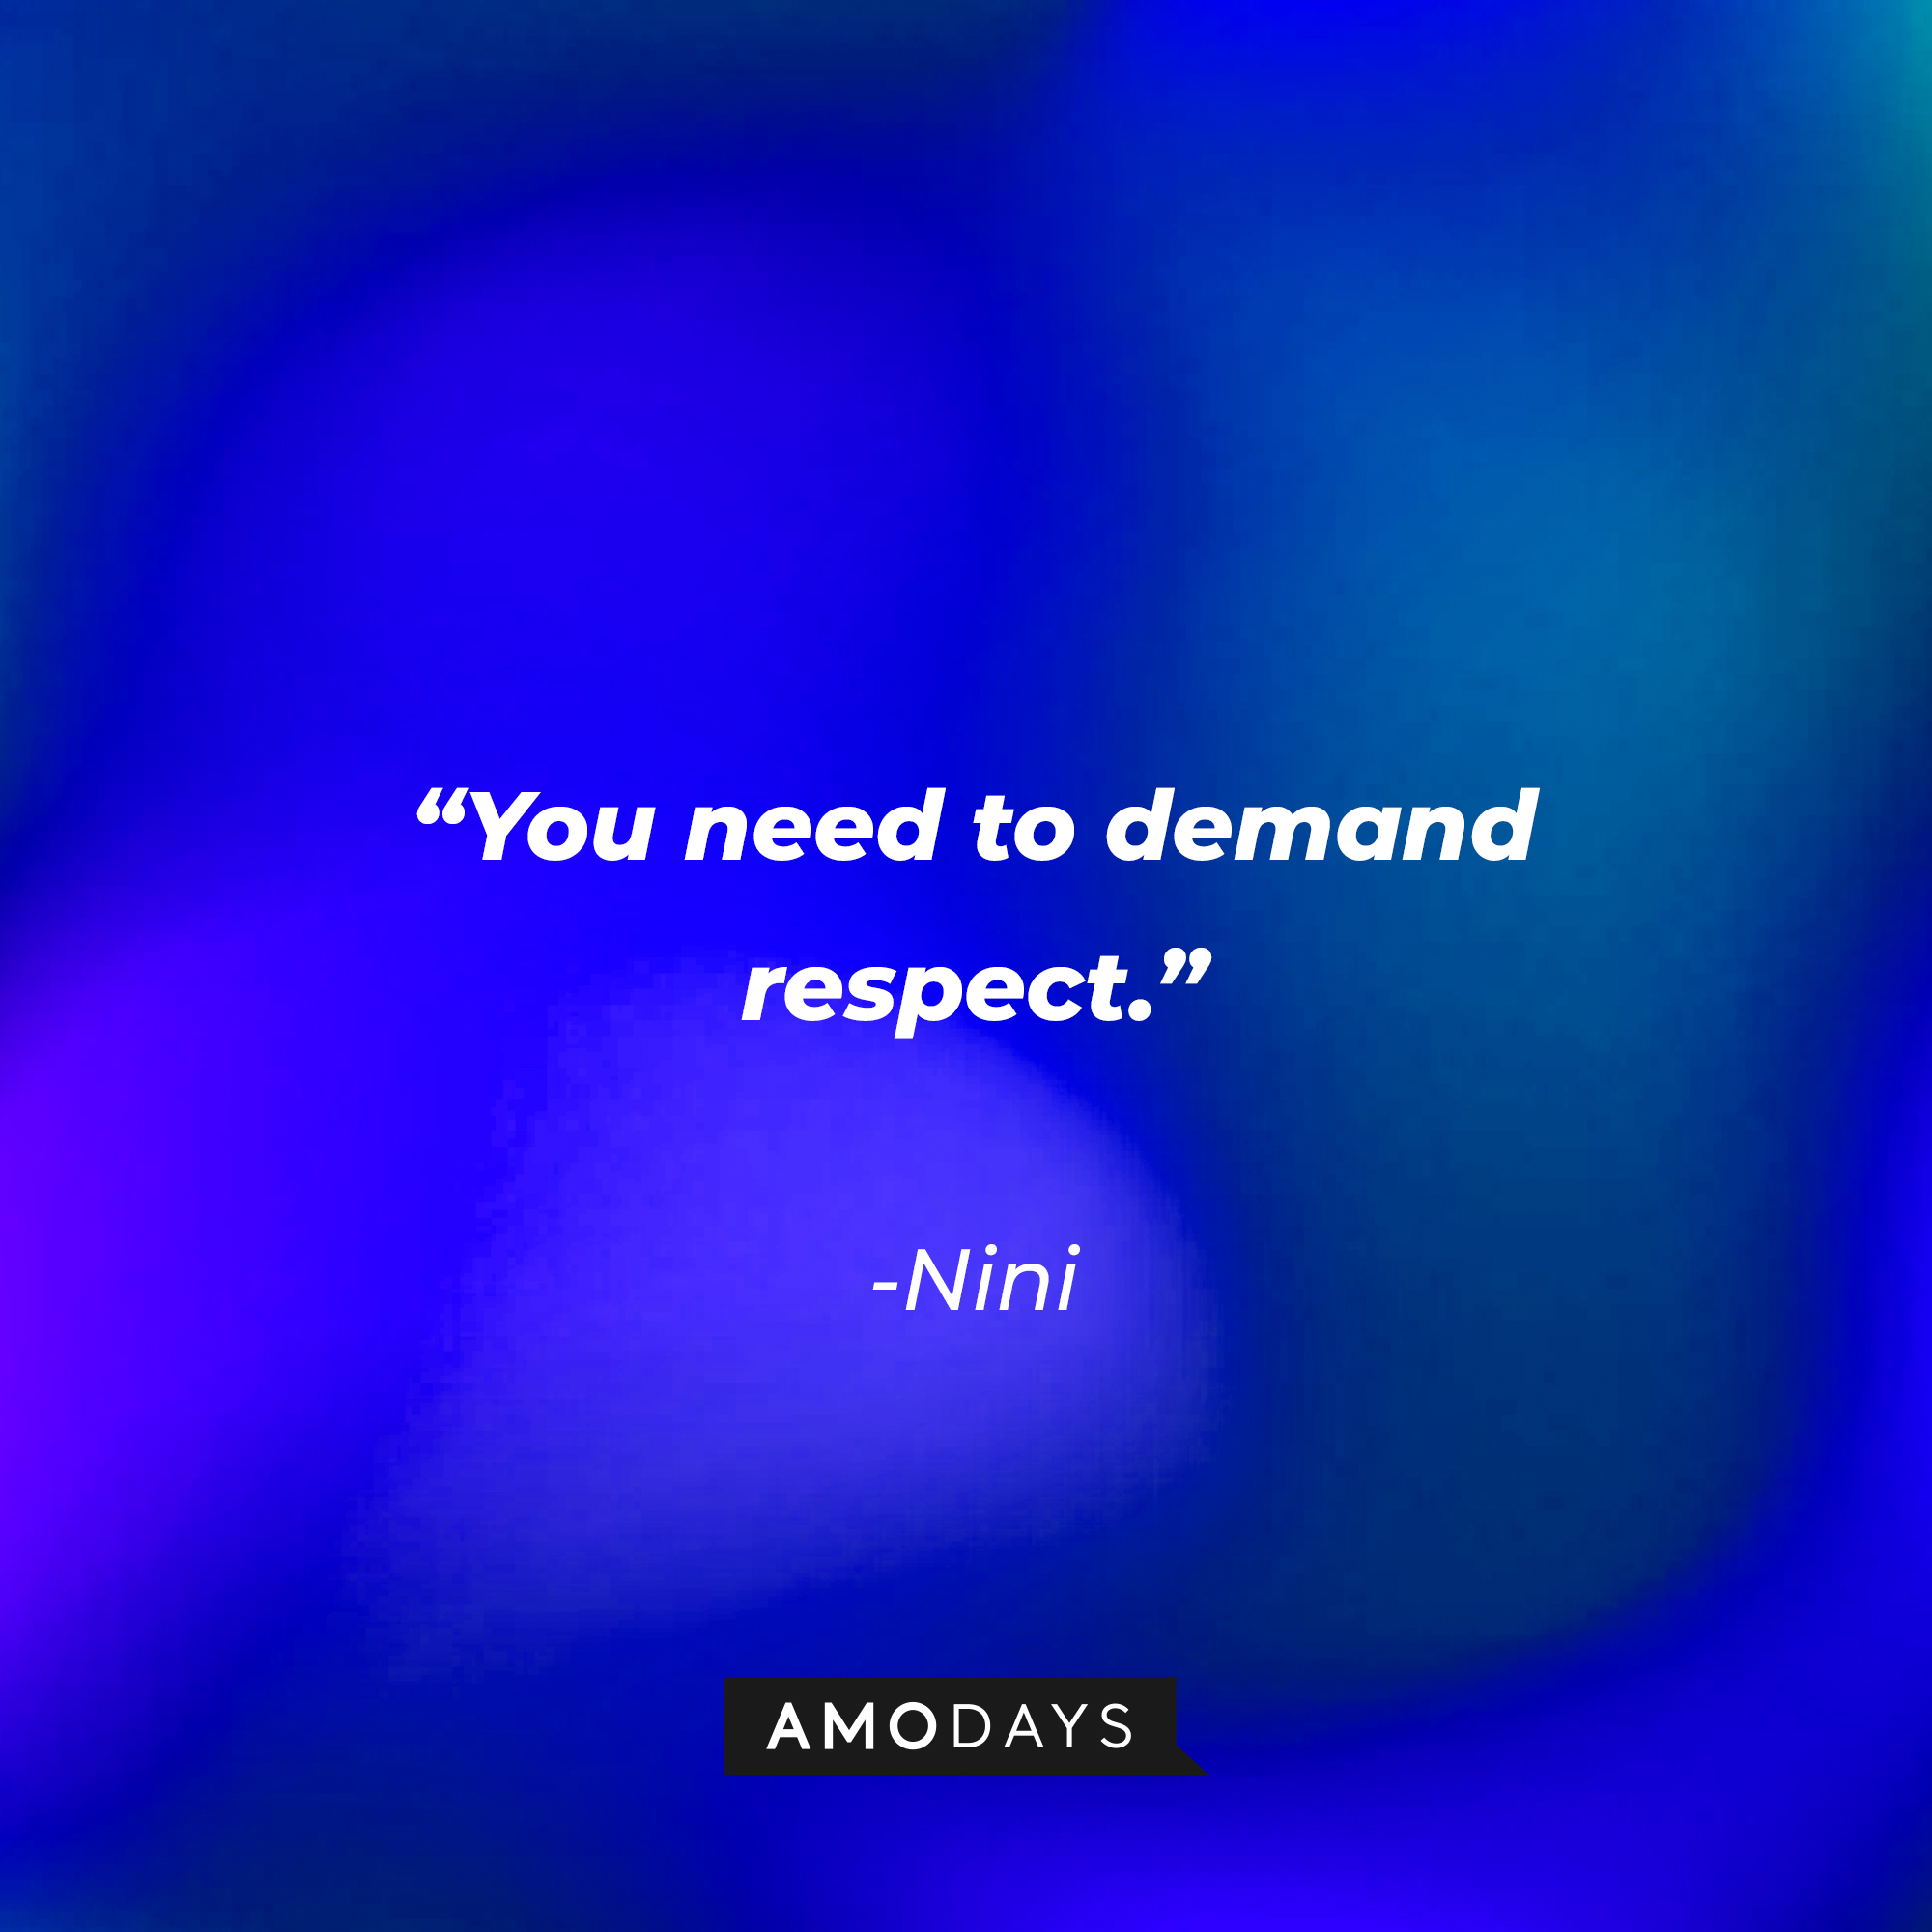 Nini’s quote: "You need to demand respect." | Source: AmoDays